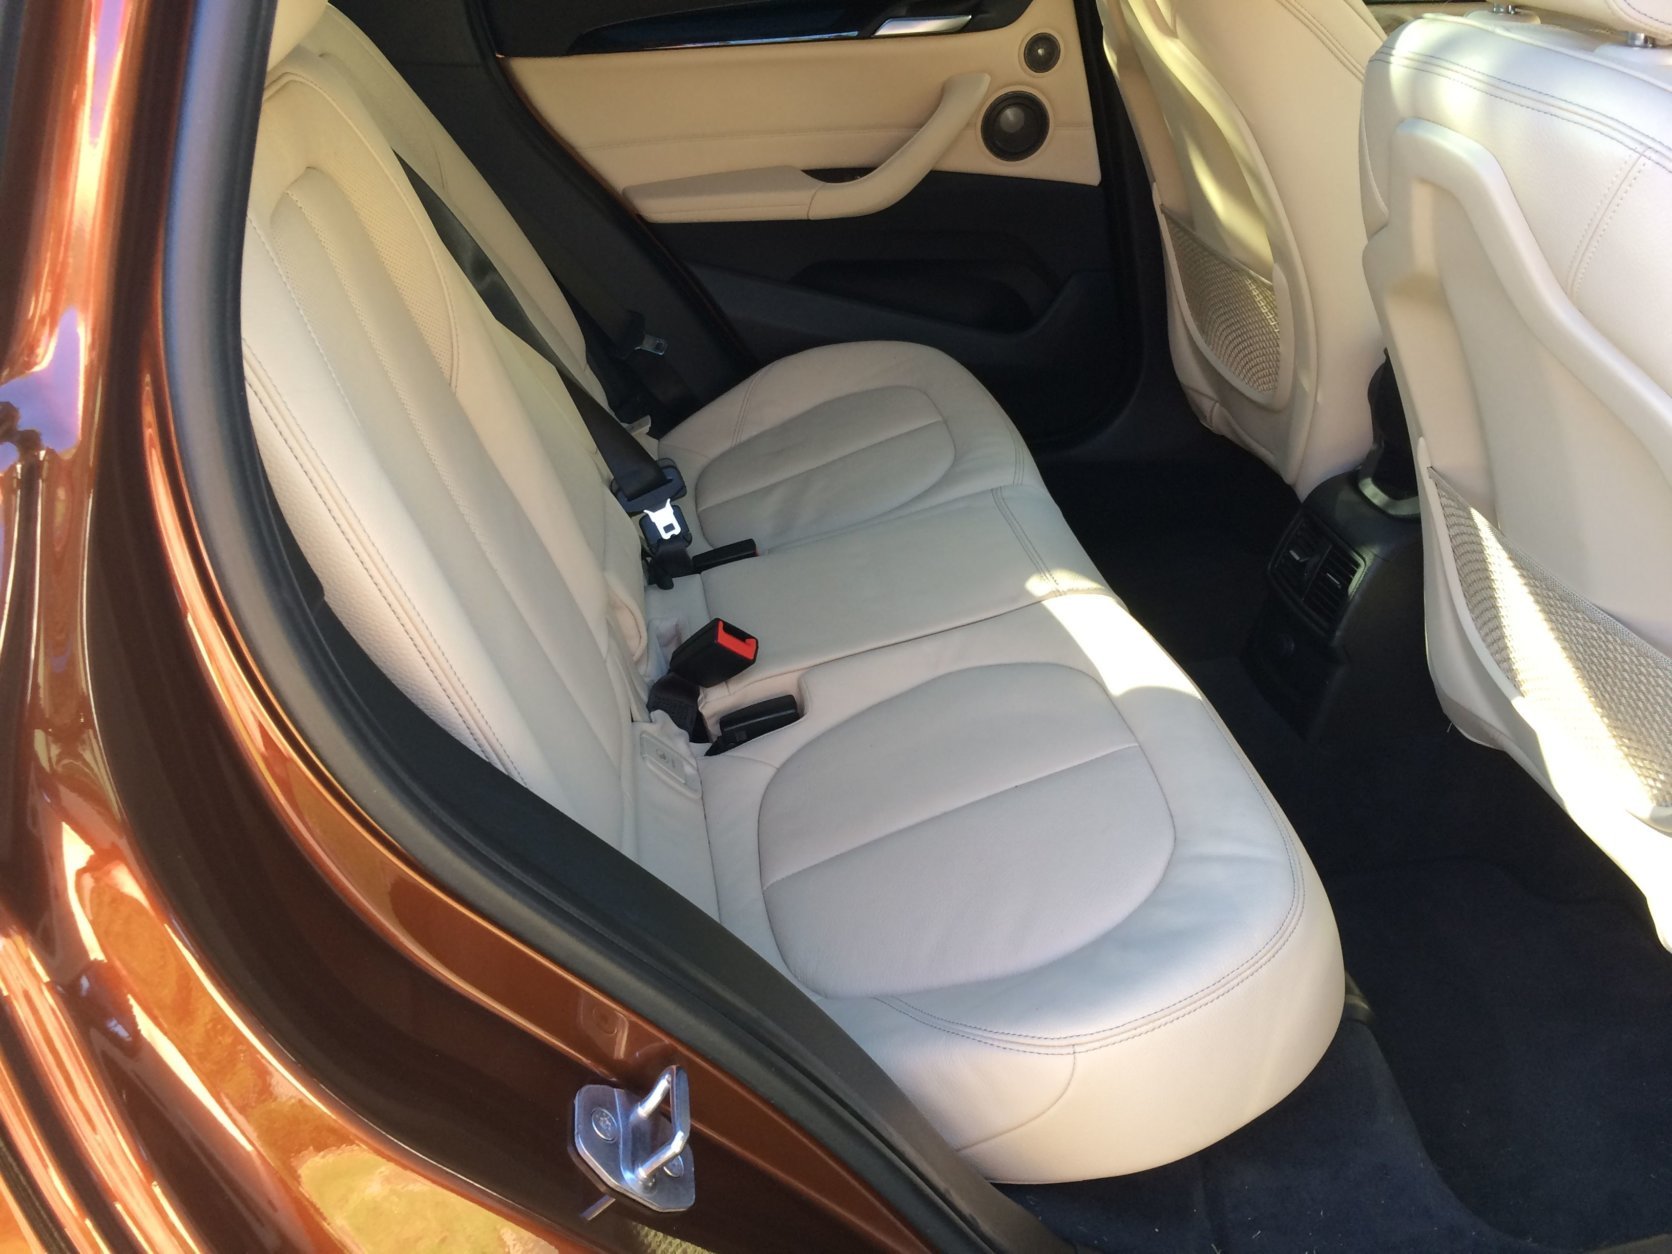 Space is where the redesigned X1 shines. While the original model was tight, the new one is open and airy inside. Rear seat head and leg room is useable for adults. (WTOP/Mike Parris)